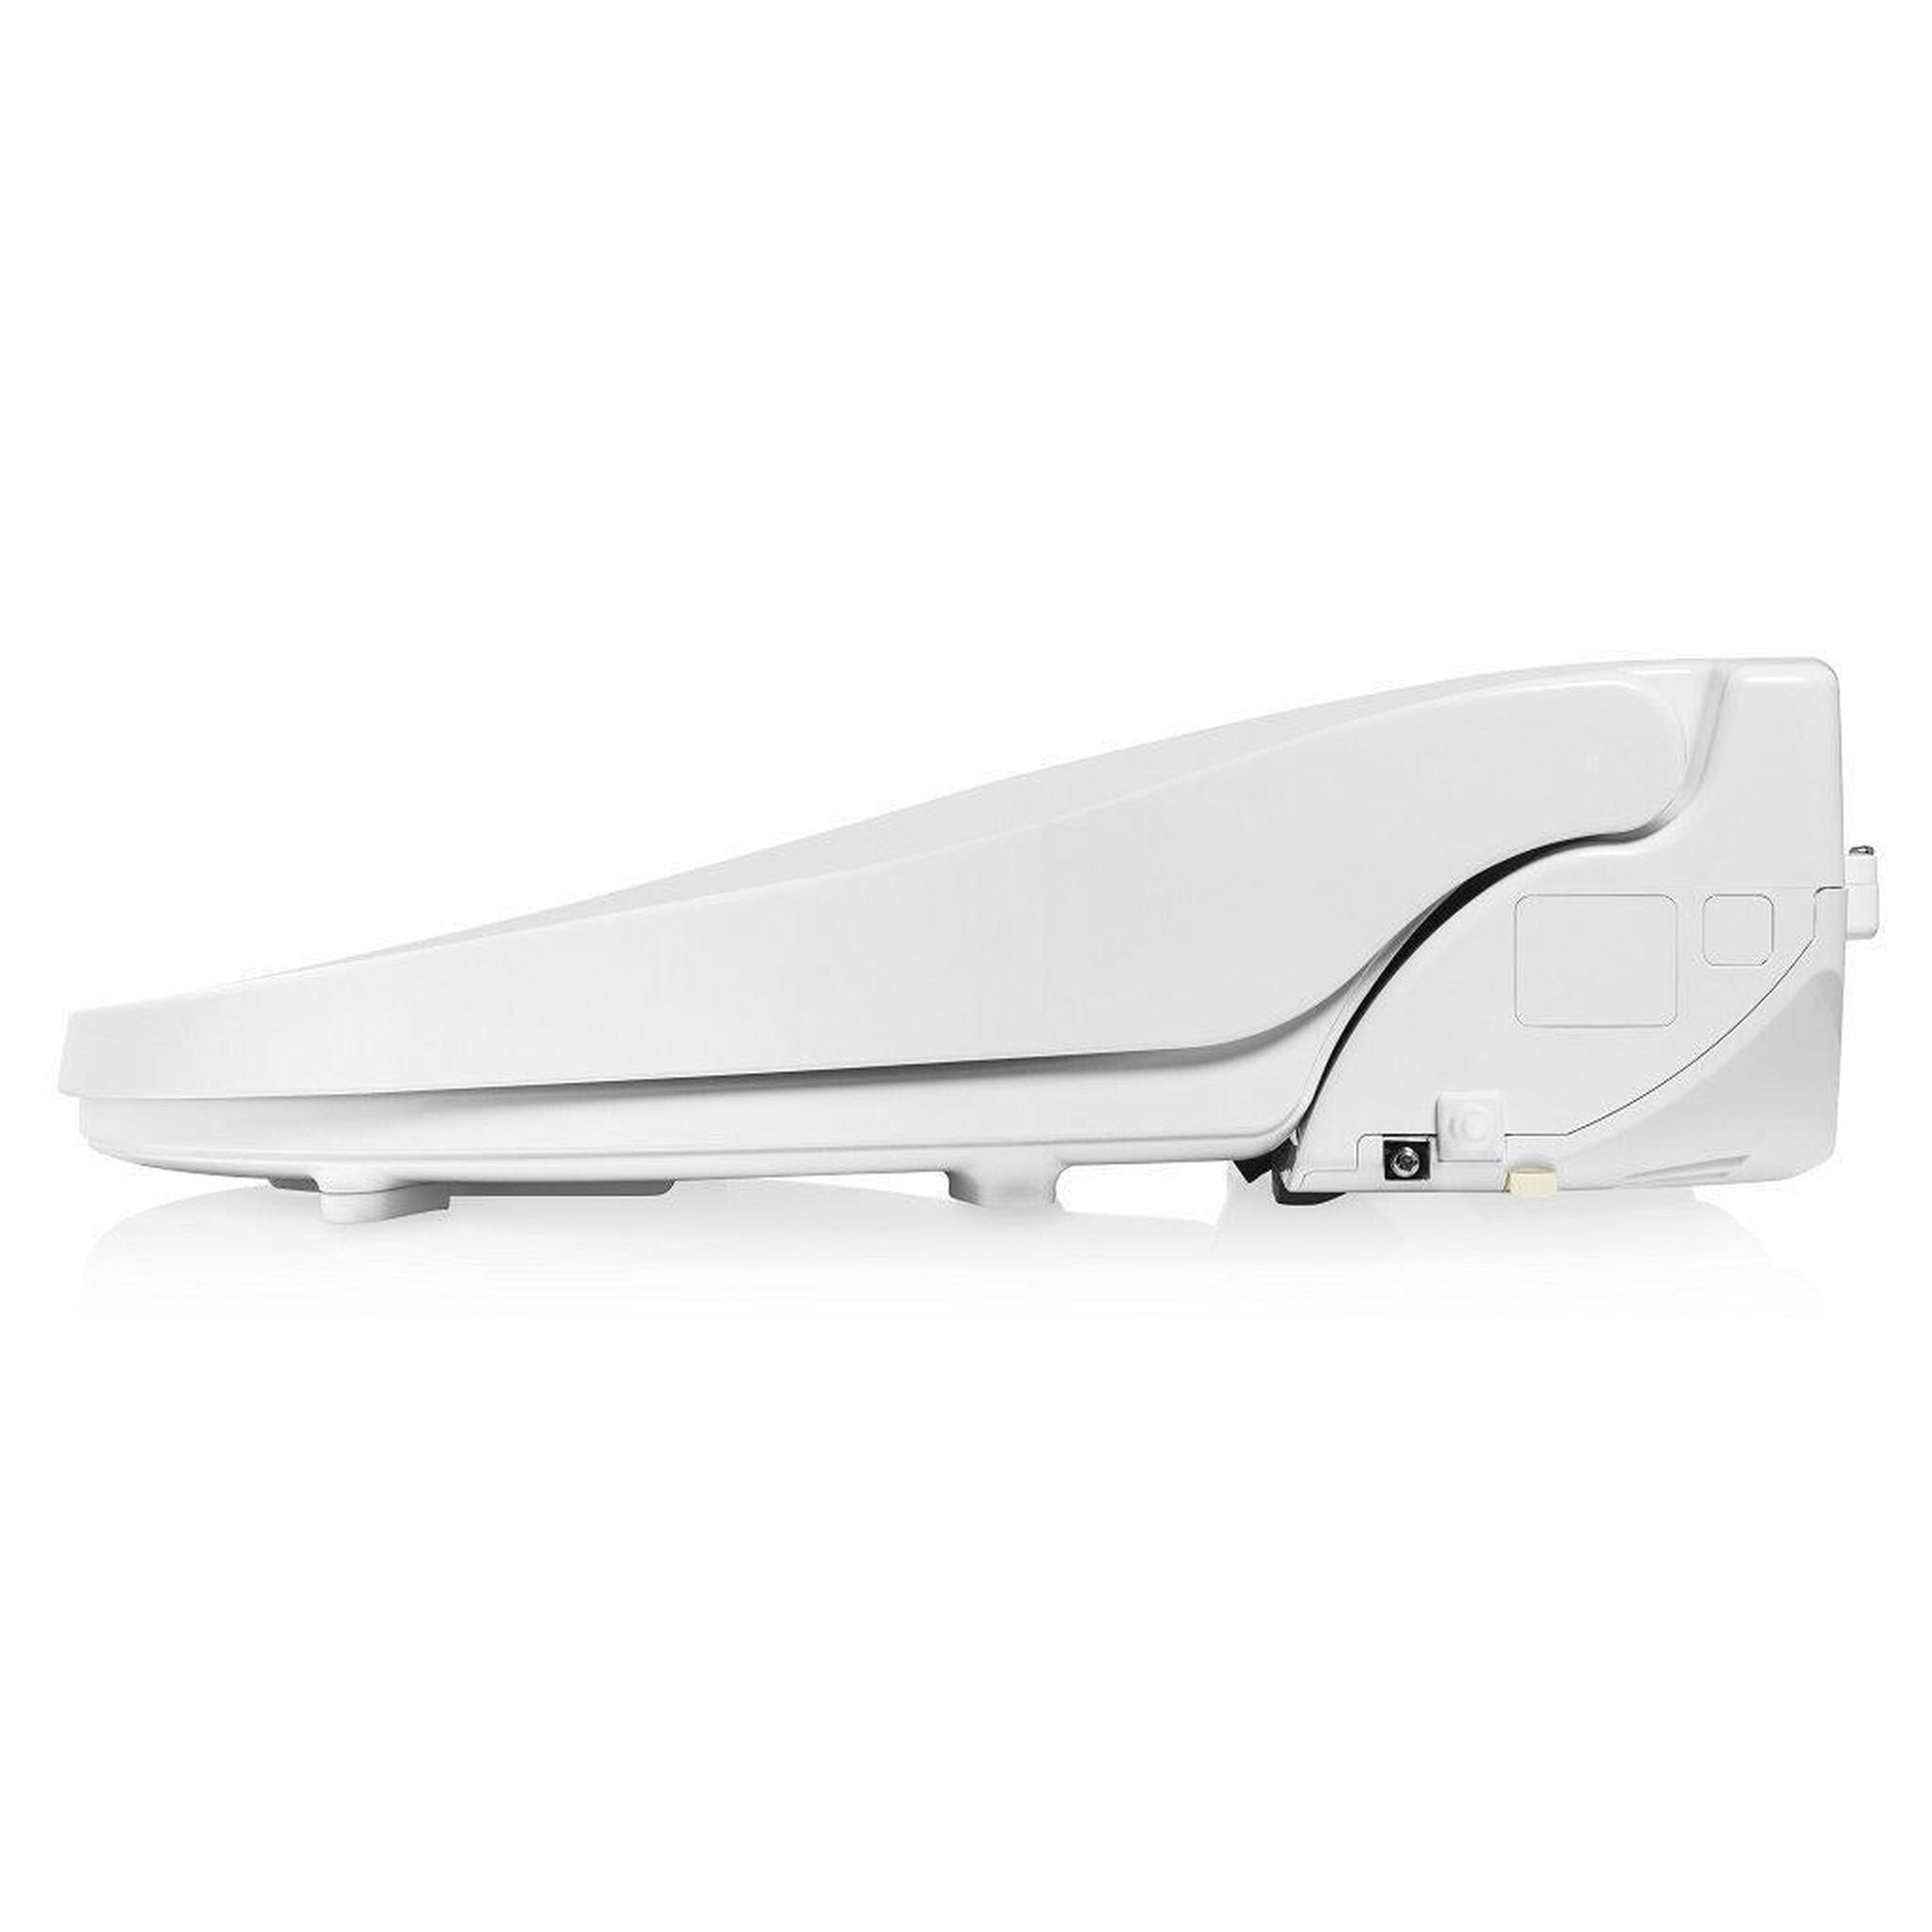 Brondell Swash Select EM417 20.7" White Elongated Electric Advanced Bidet Toilet Seat With Side Control Panel